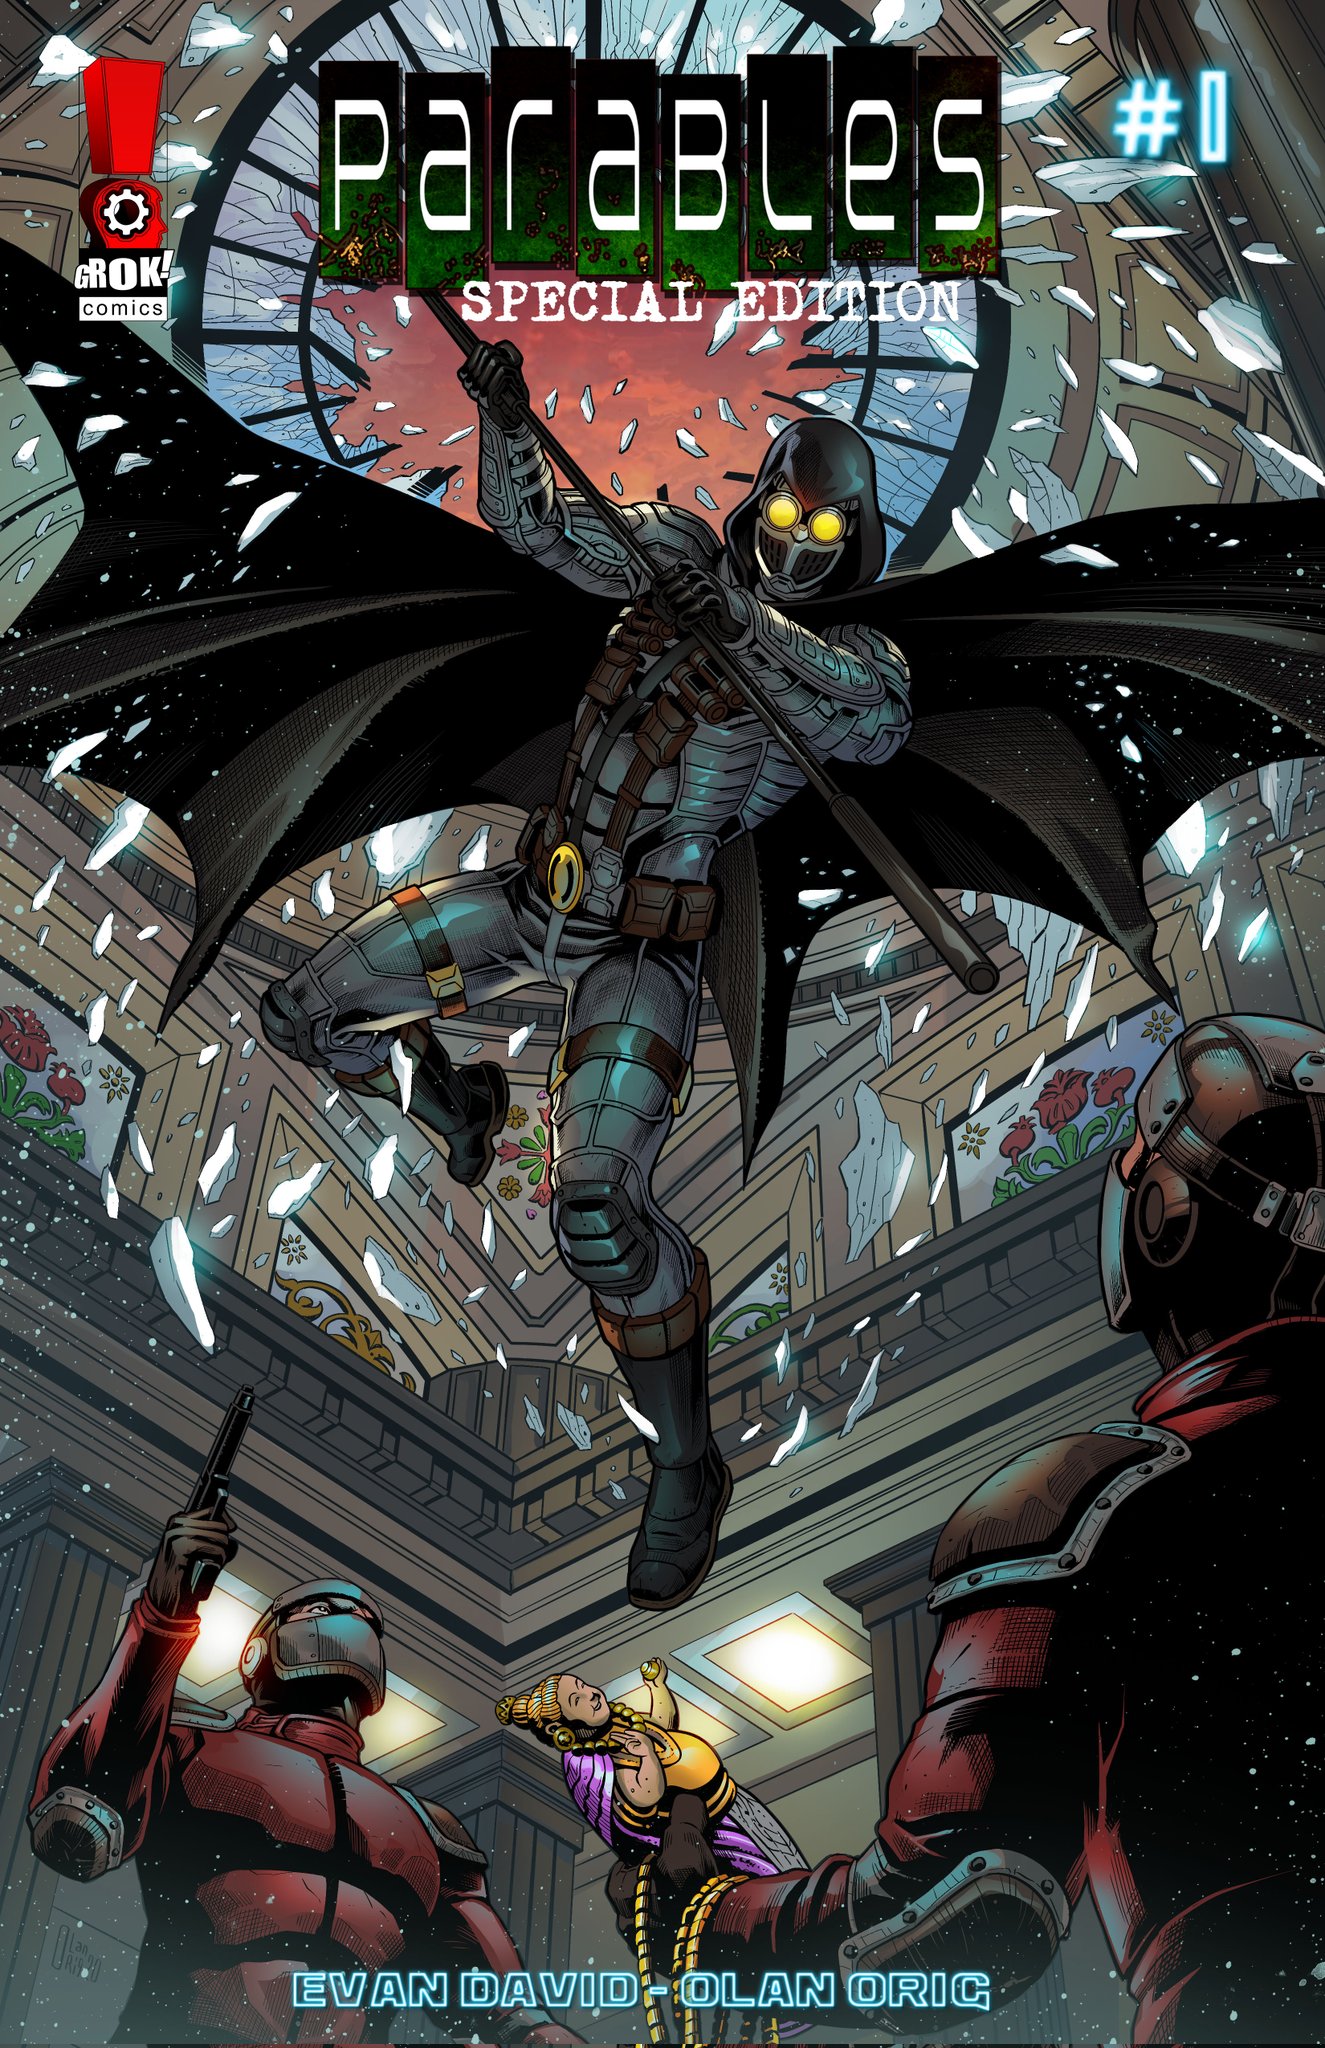 THE REMNANT: Thief In The Night #1 (and Back Issues)